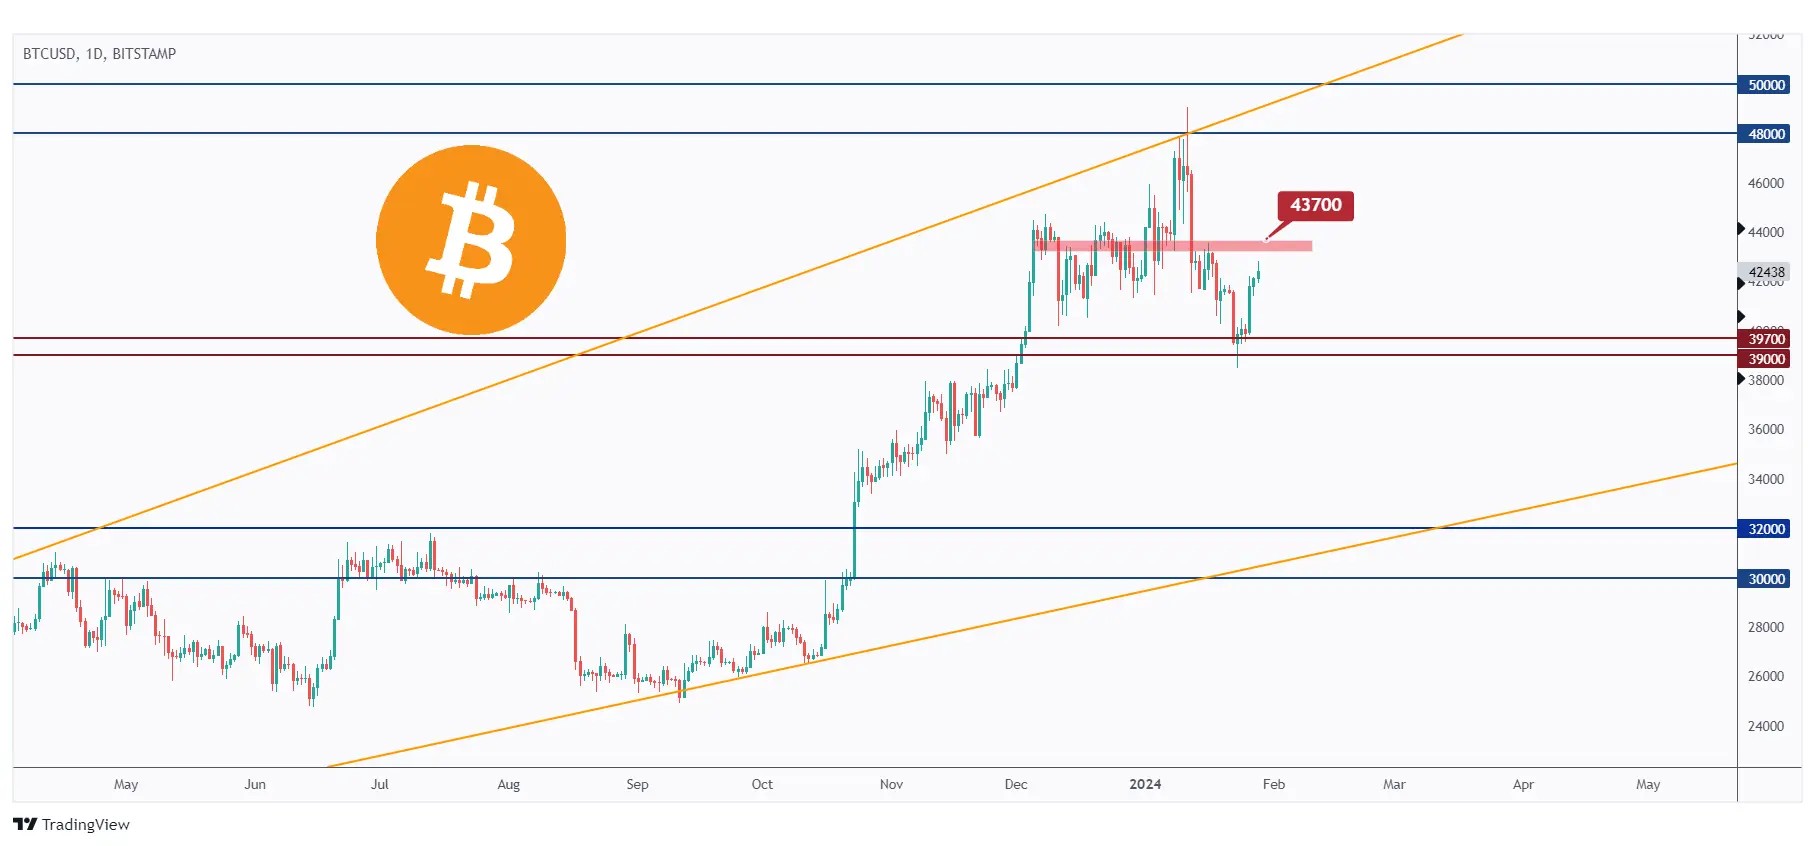 btc daily chart rejecting the $39,000 support and approaching a major high at $43,700.